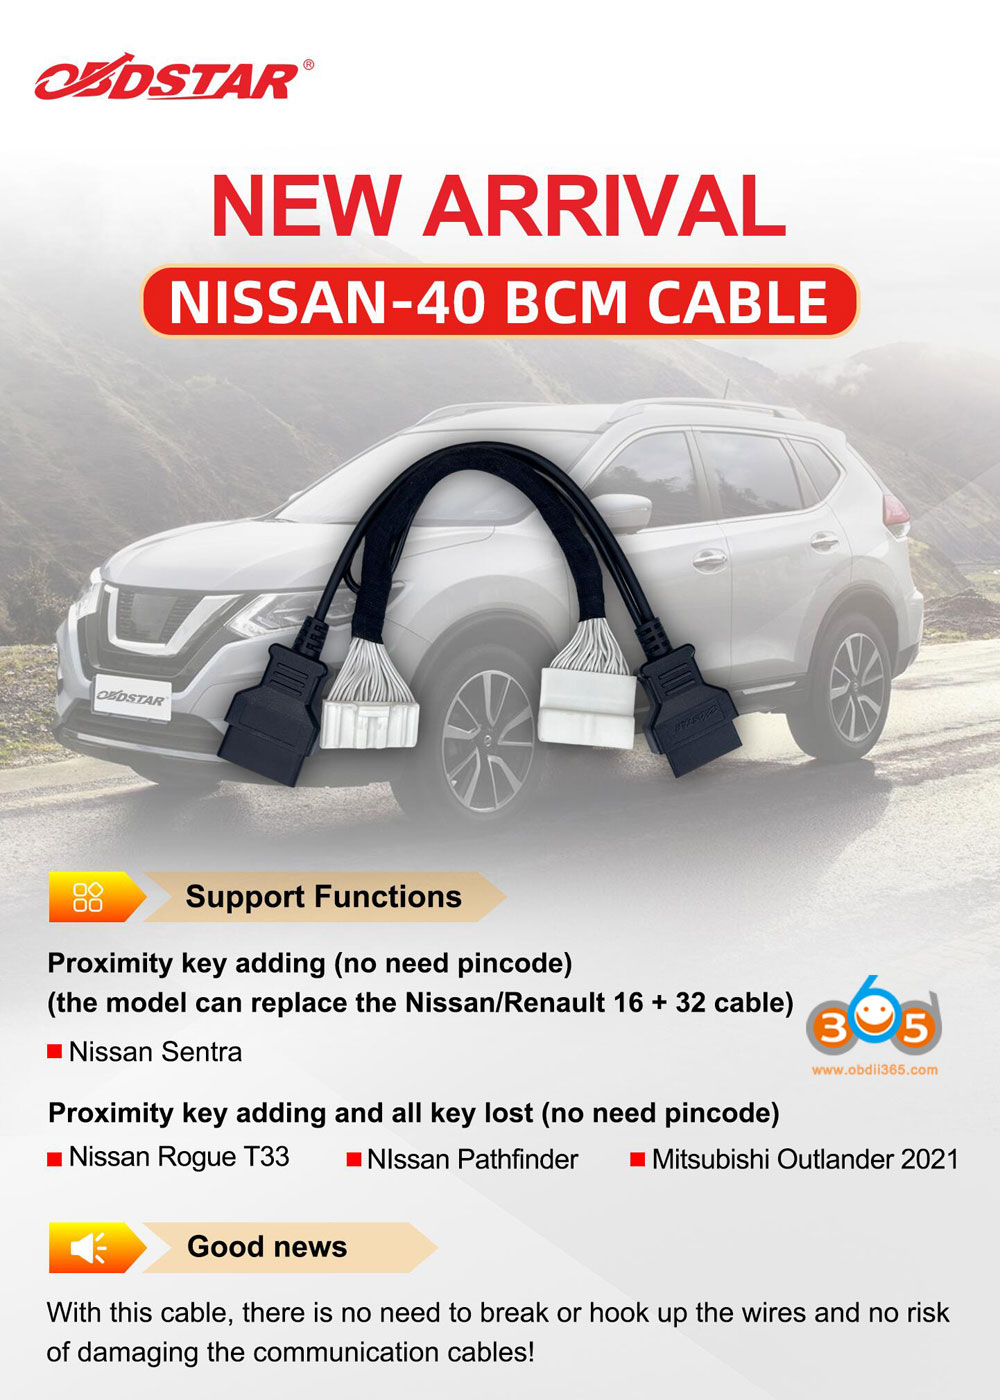 OBDSTAR Nissan 40 BCM Cable 